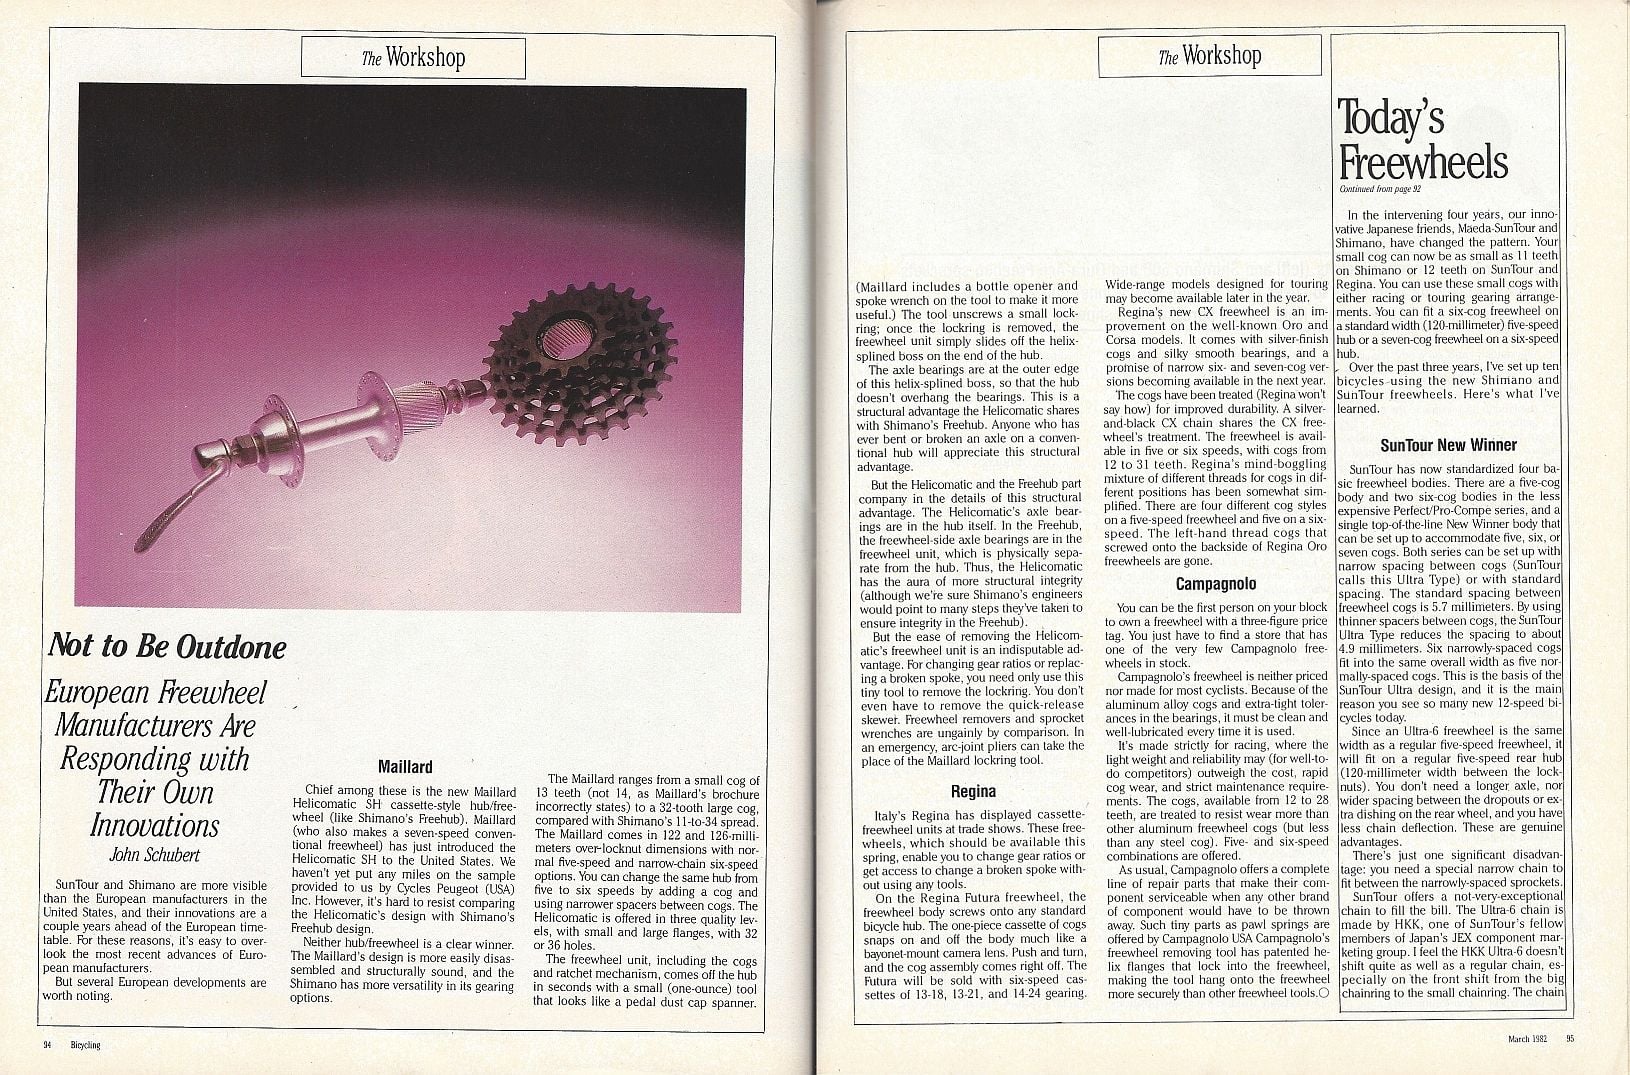 Equipment/Product Review (1982) Freewheel Innovations - Bike Forums